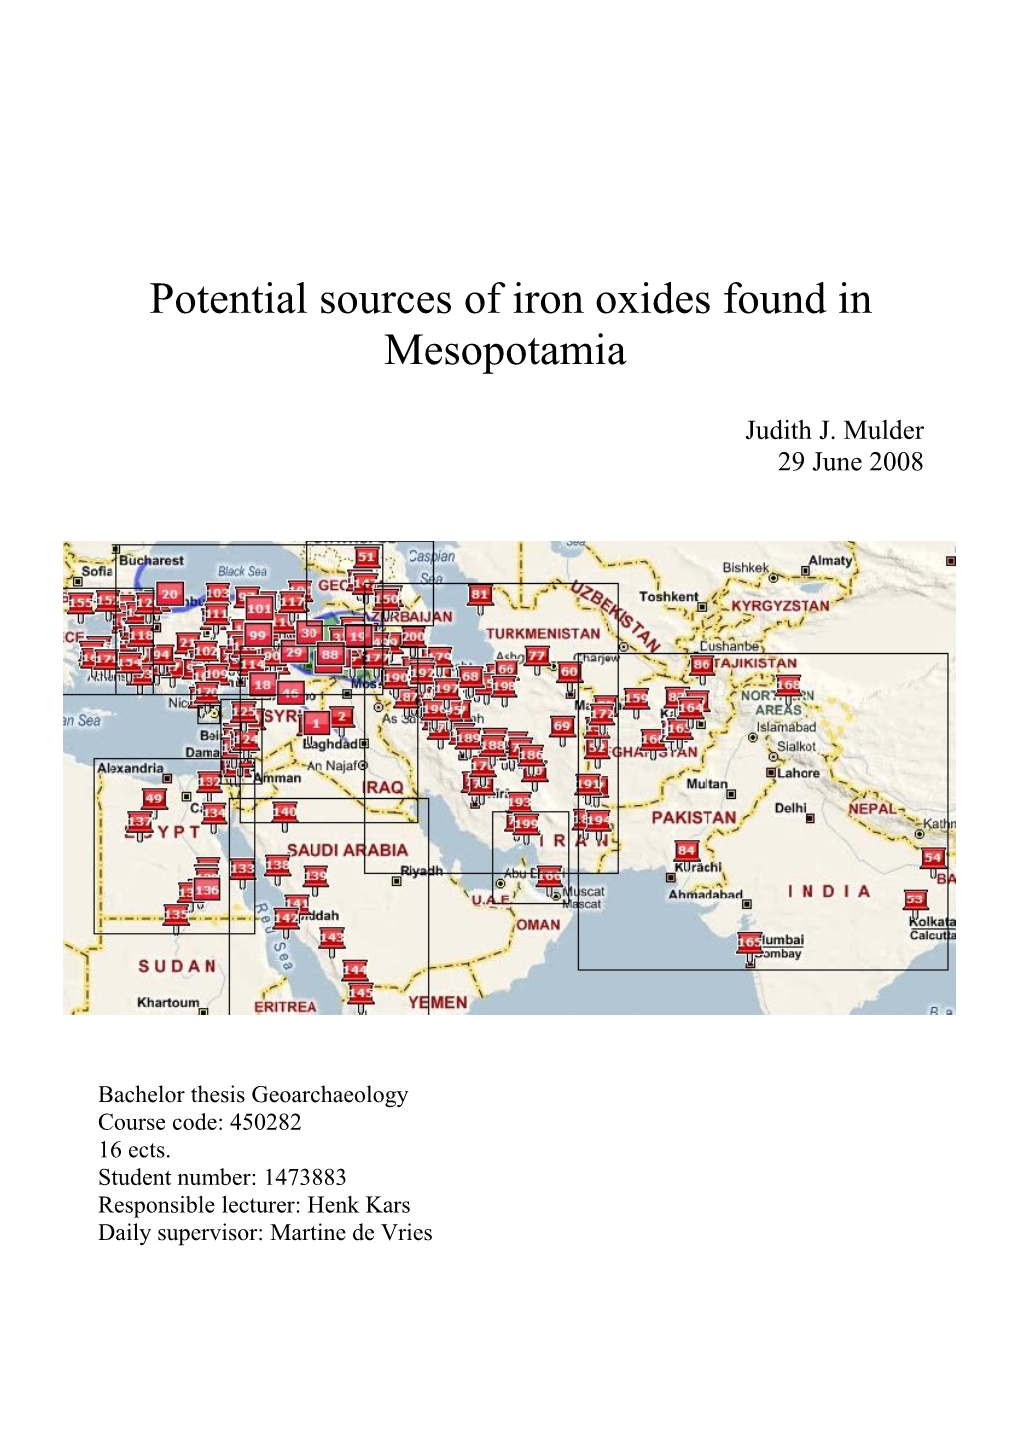 Archeometric Side of the Research to Haematite in Mesopotamia